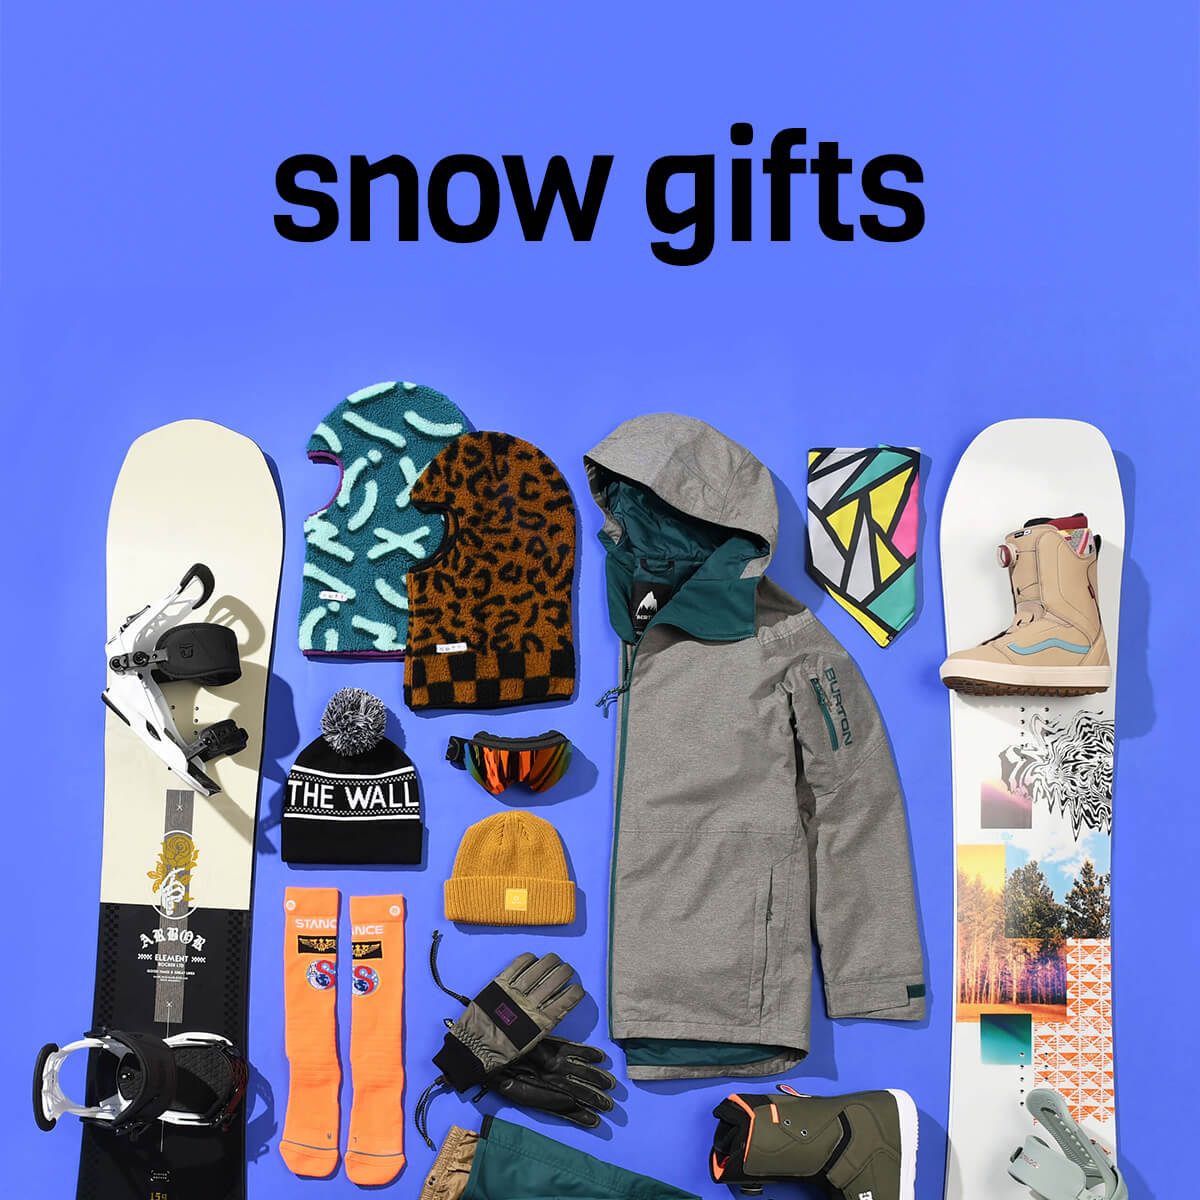 SNOW GIFTS